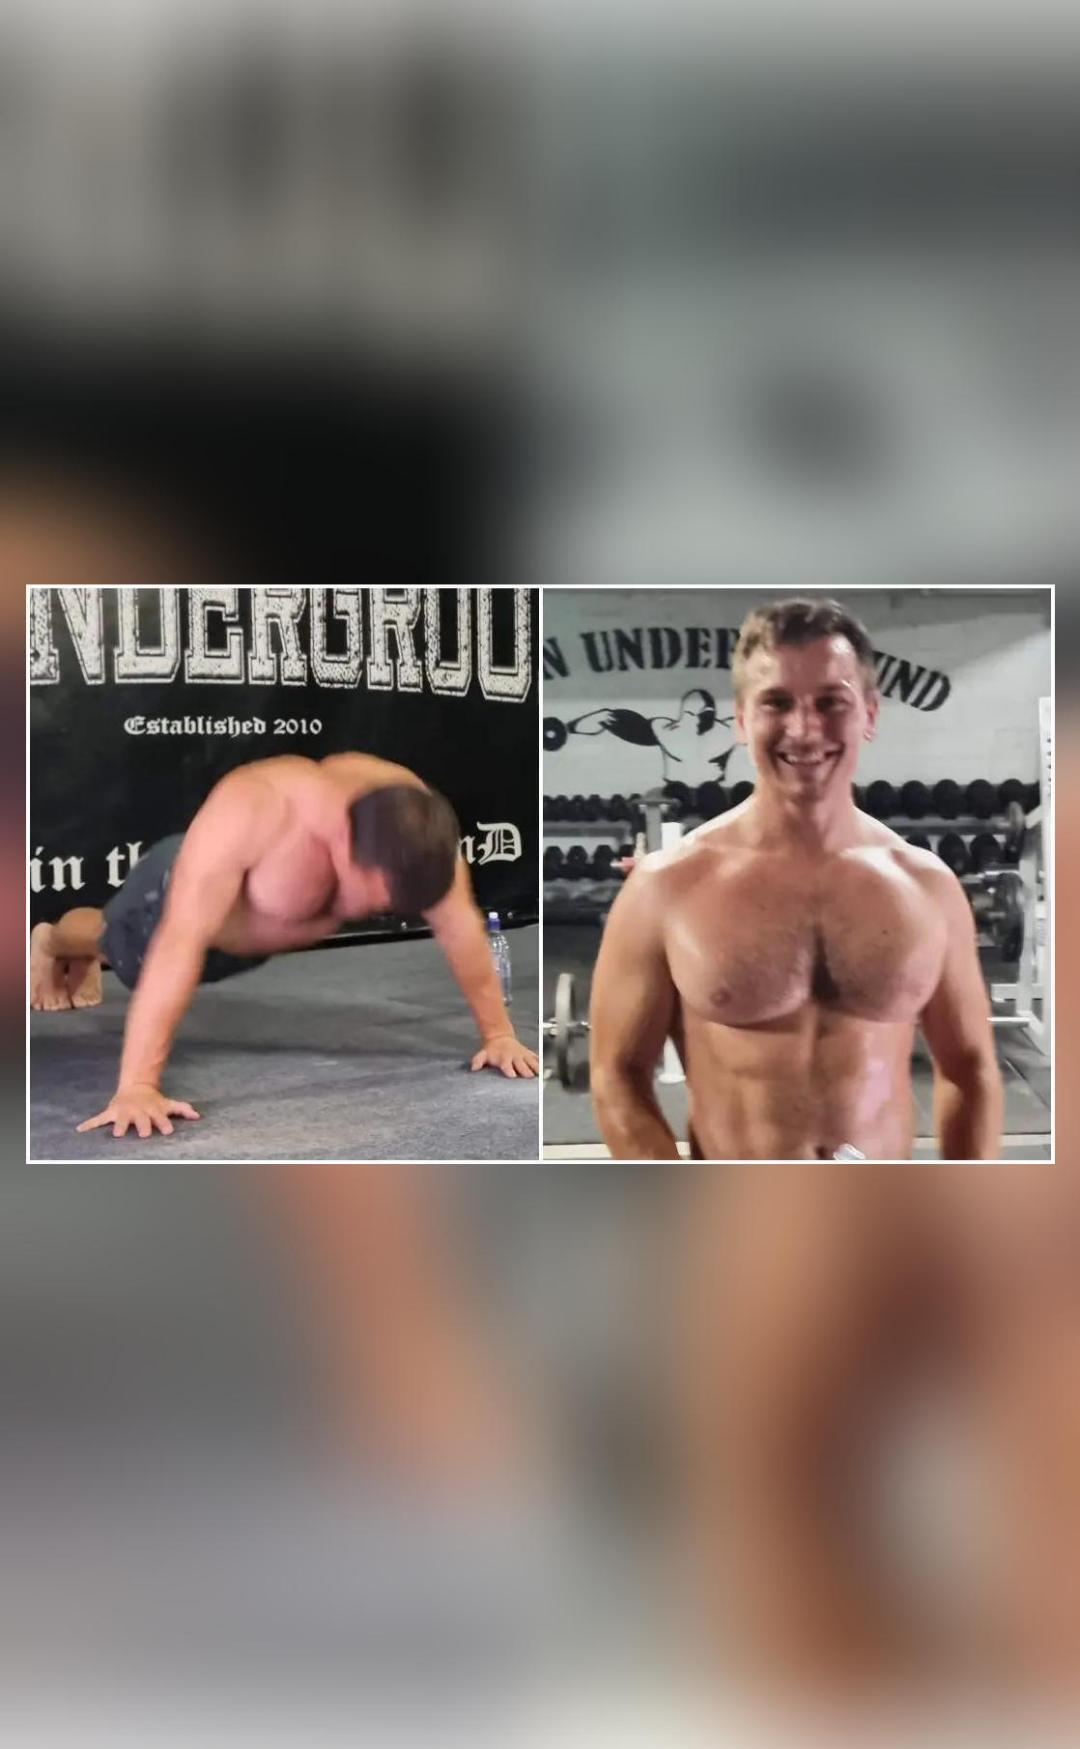 33-year-old breaks Guinness World Record for most push-ups in an hour